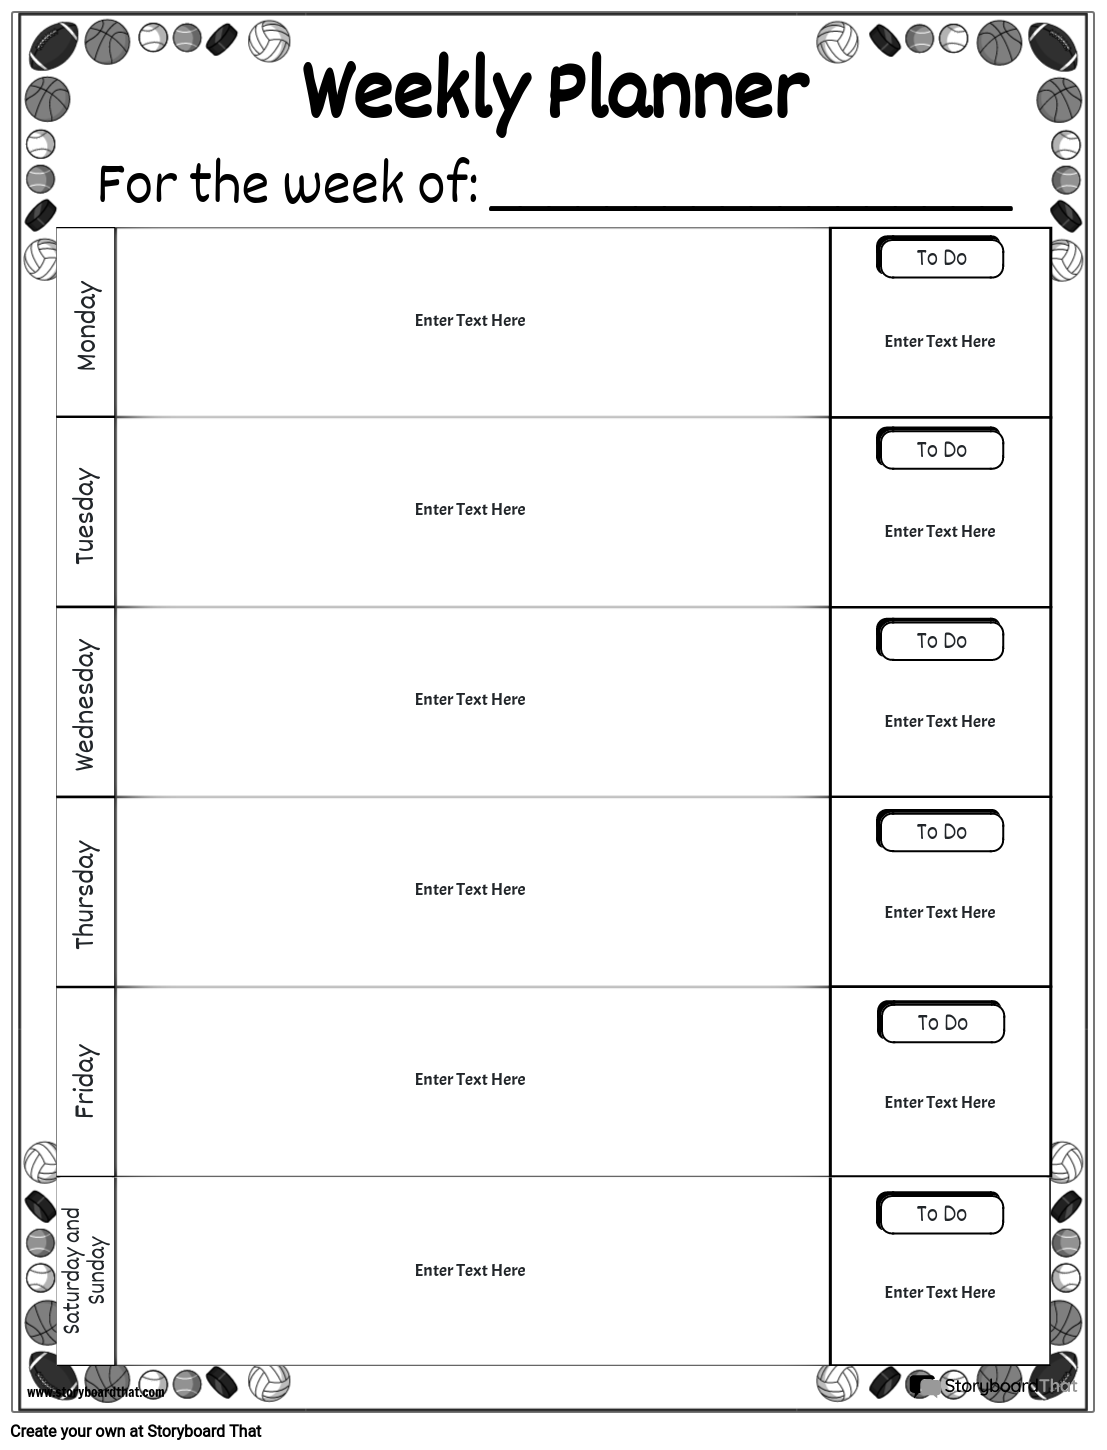 bw-weekly-planner-5-storyboard-by-bg-examples